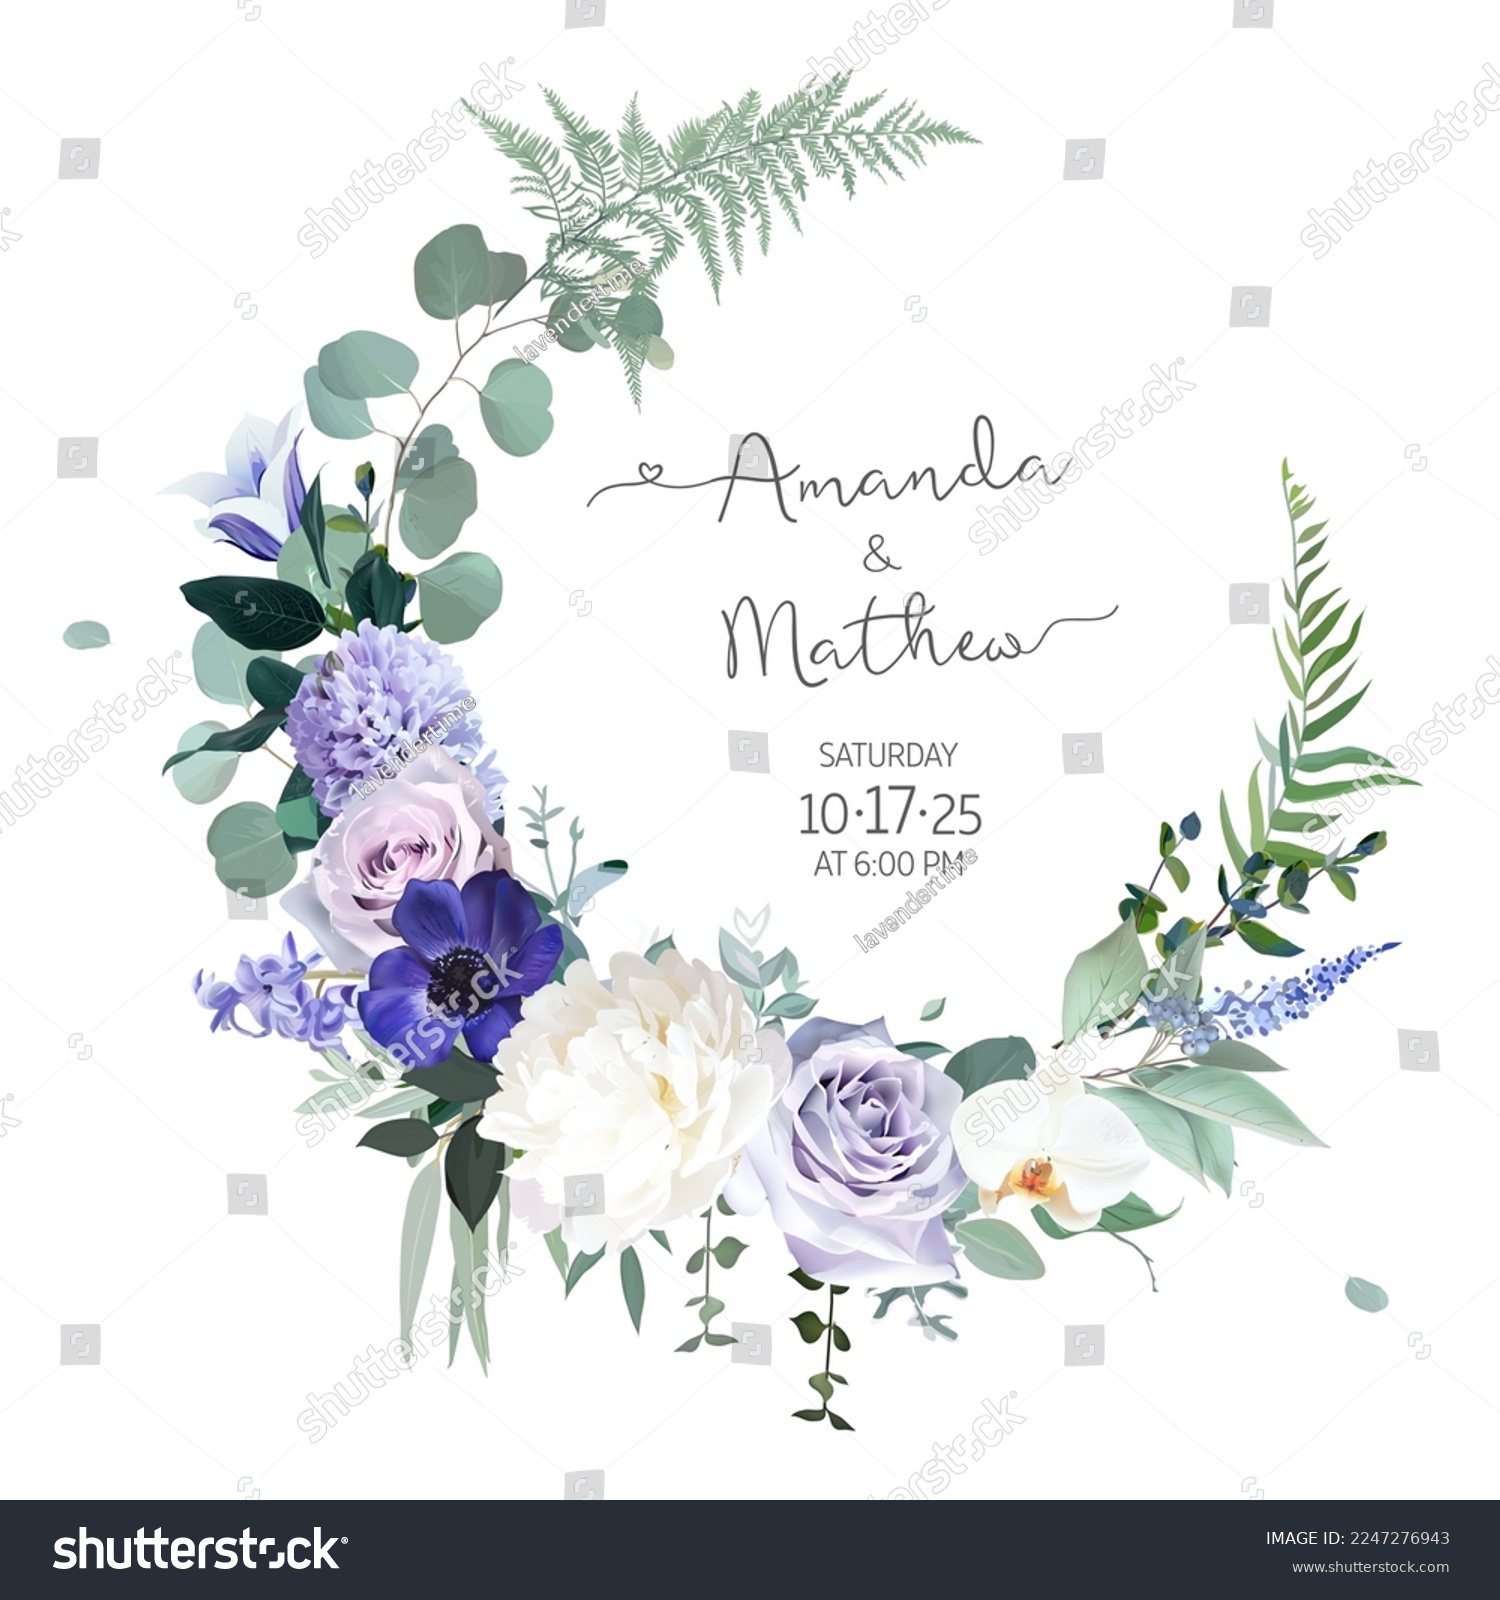 SVG of Pale purple rose, dusty mauve and lilac hyacinth, violet anemone, lavender, white peony, orchid, eucalyptus vector design frame. Stylish wedding flower round card. Elements are isolated and editable svg